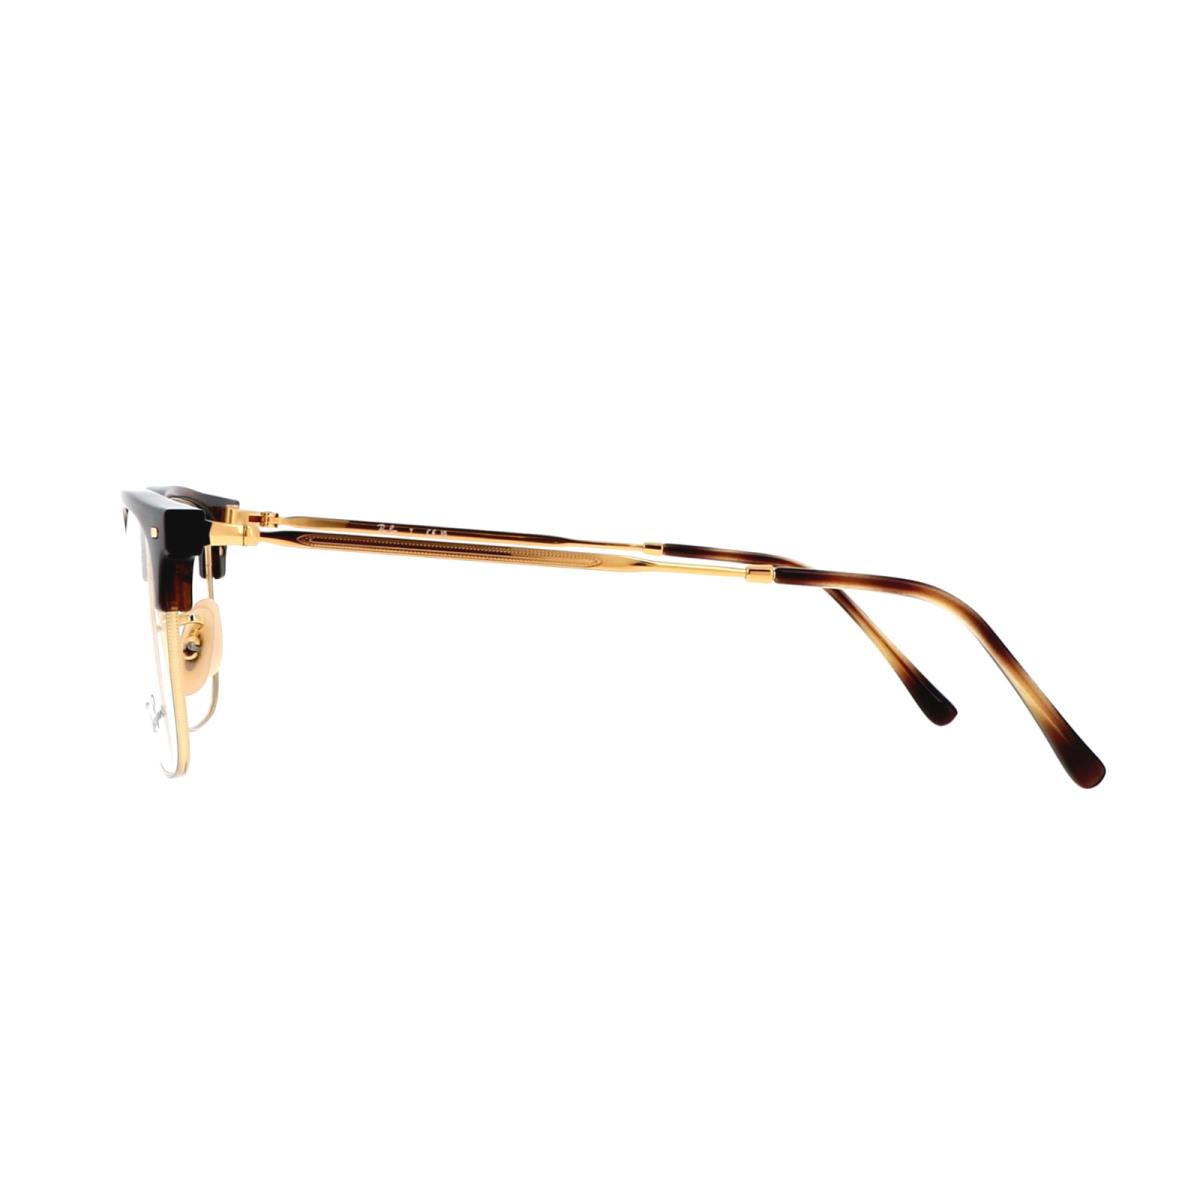 Ray-ban Clubmaster Reading Glasses RB 7216 2012 Tortoise Gold Frame Readers - Havana Tortoise & Gold, Frame: Tortoise & Gold, Lens: